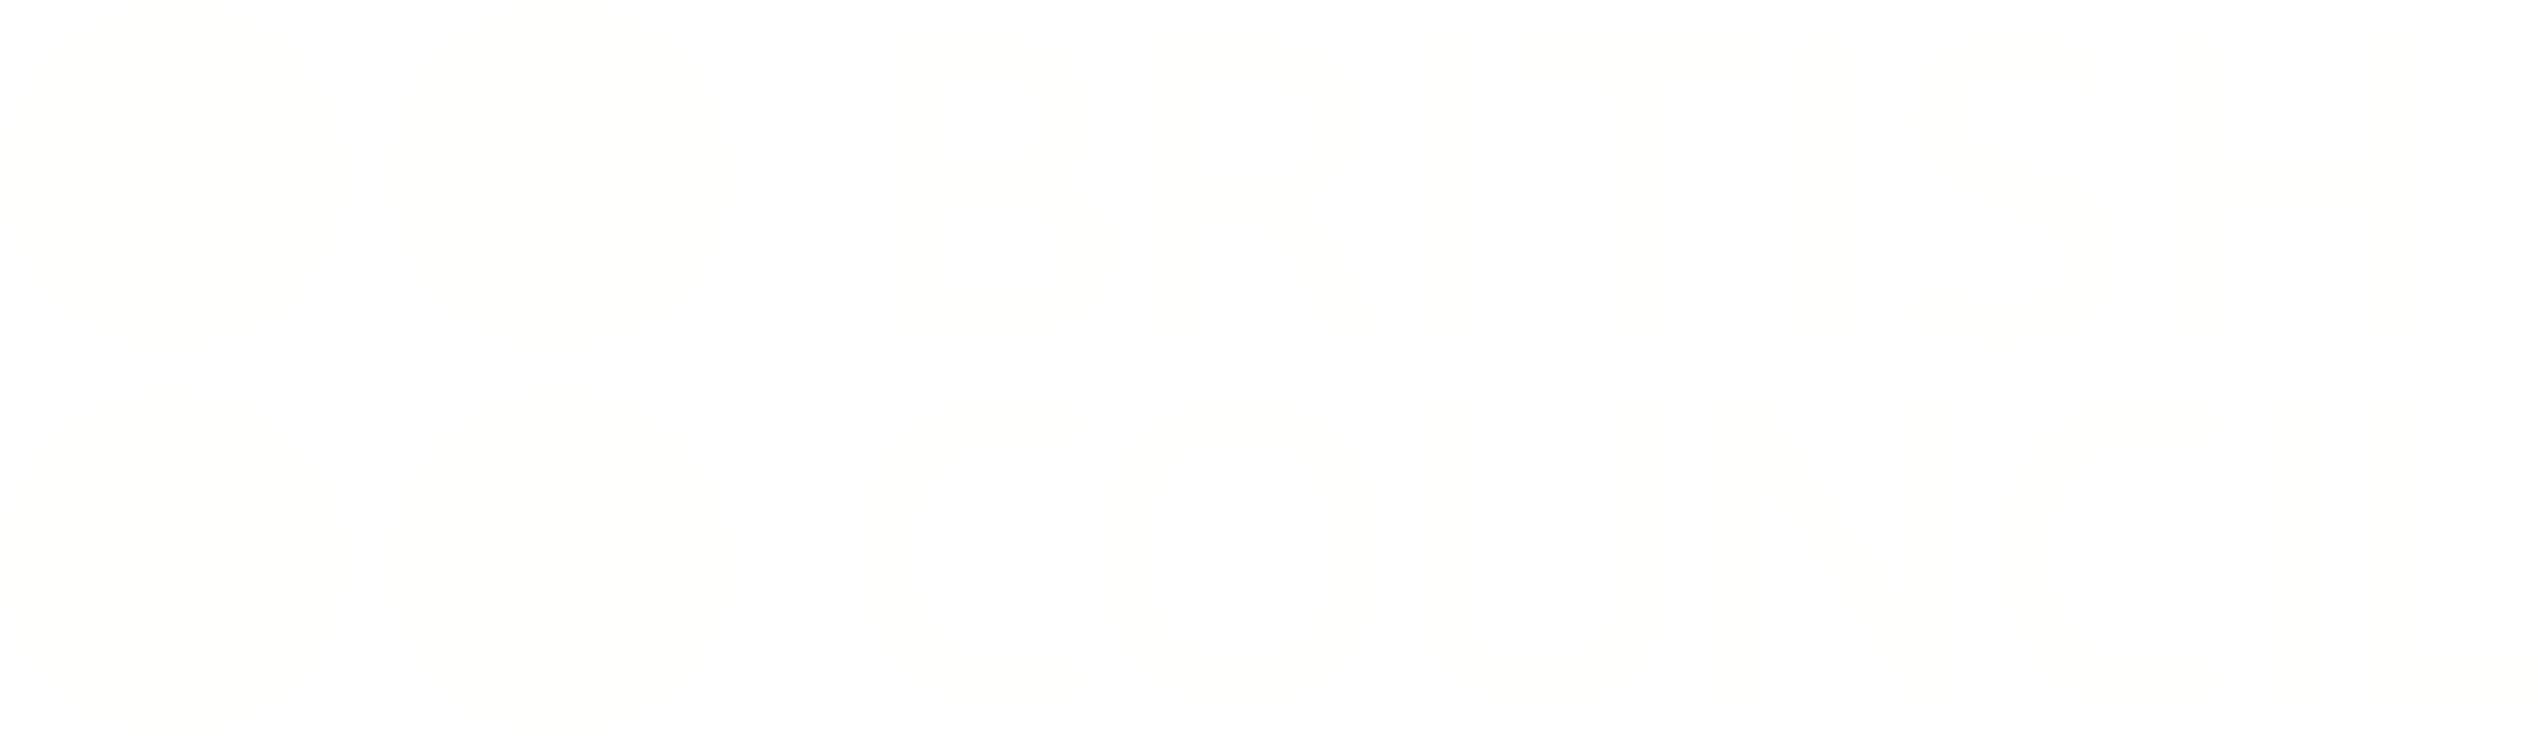 British Council Logo PNG - FREE Vector Design - Cdr, Ai, EPS, PNG, SVG